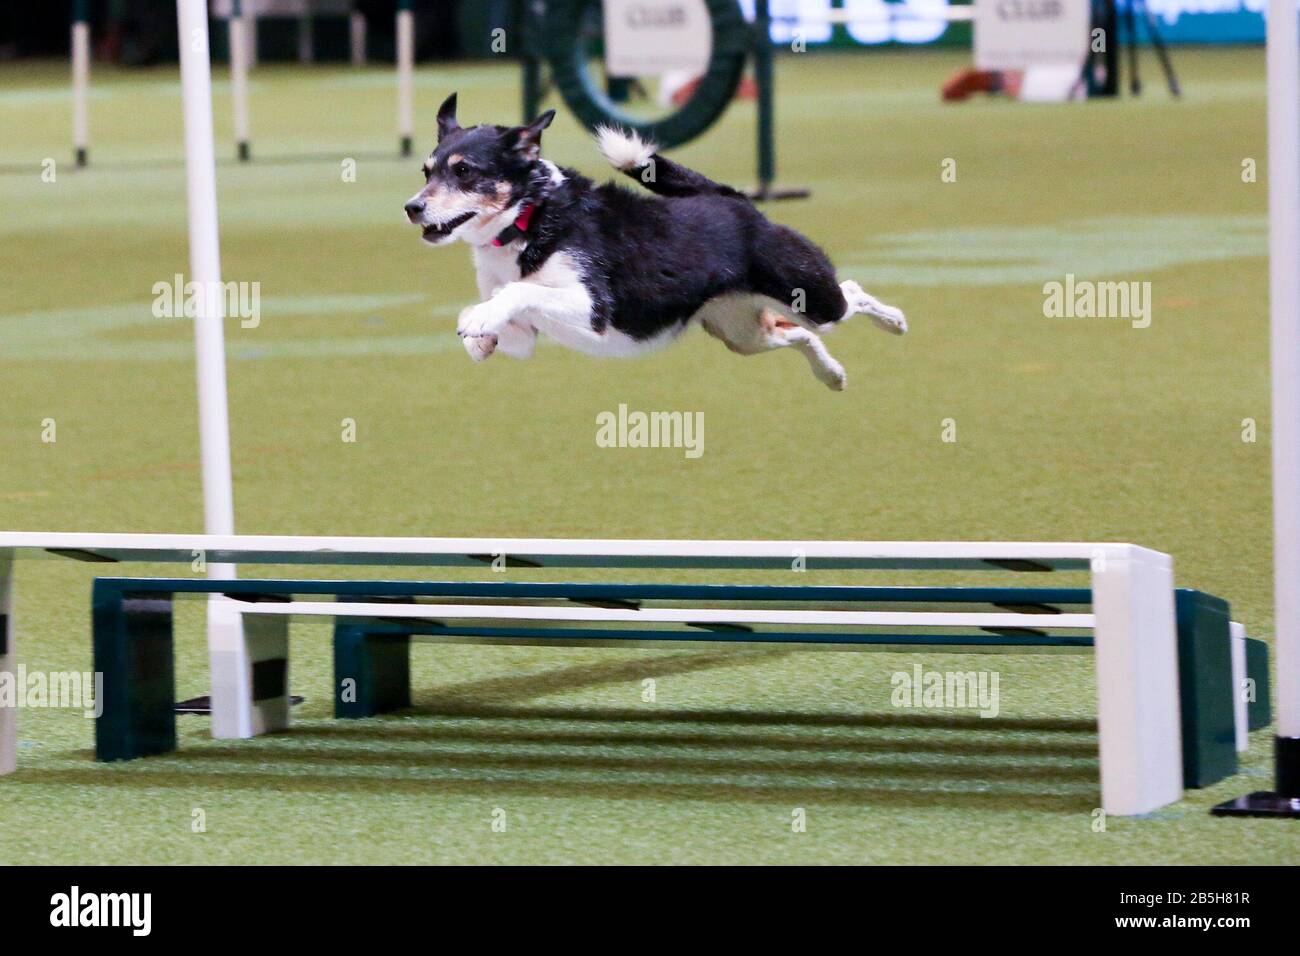 Birmingham, UK. 8th Mar, 2020. Final day of Crufts 2020. Little Miss Jumping Jinx leaps over a jump in the Agility Final. Credit: ️Jon Freeman/Alamy Live News Stock Photo